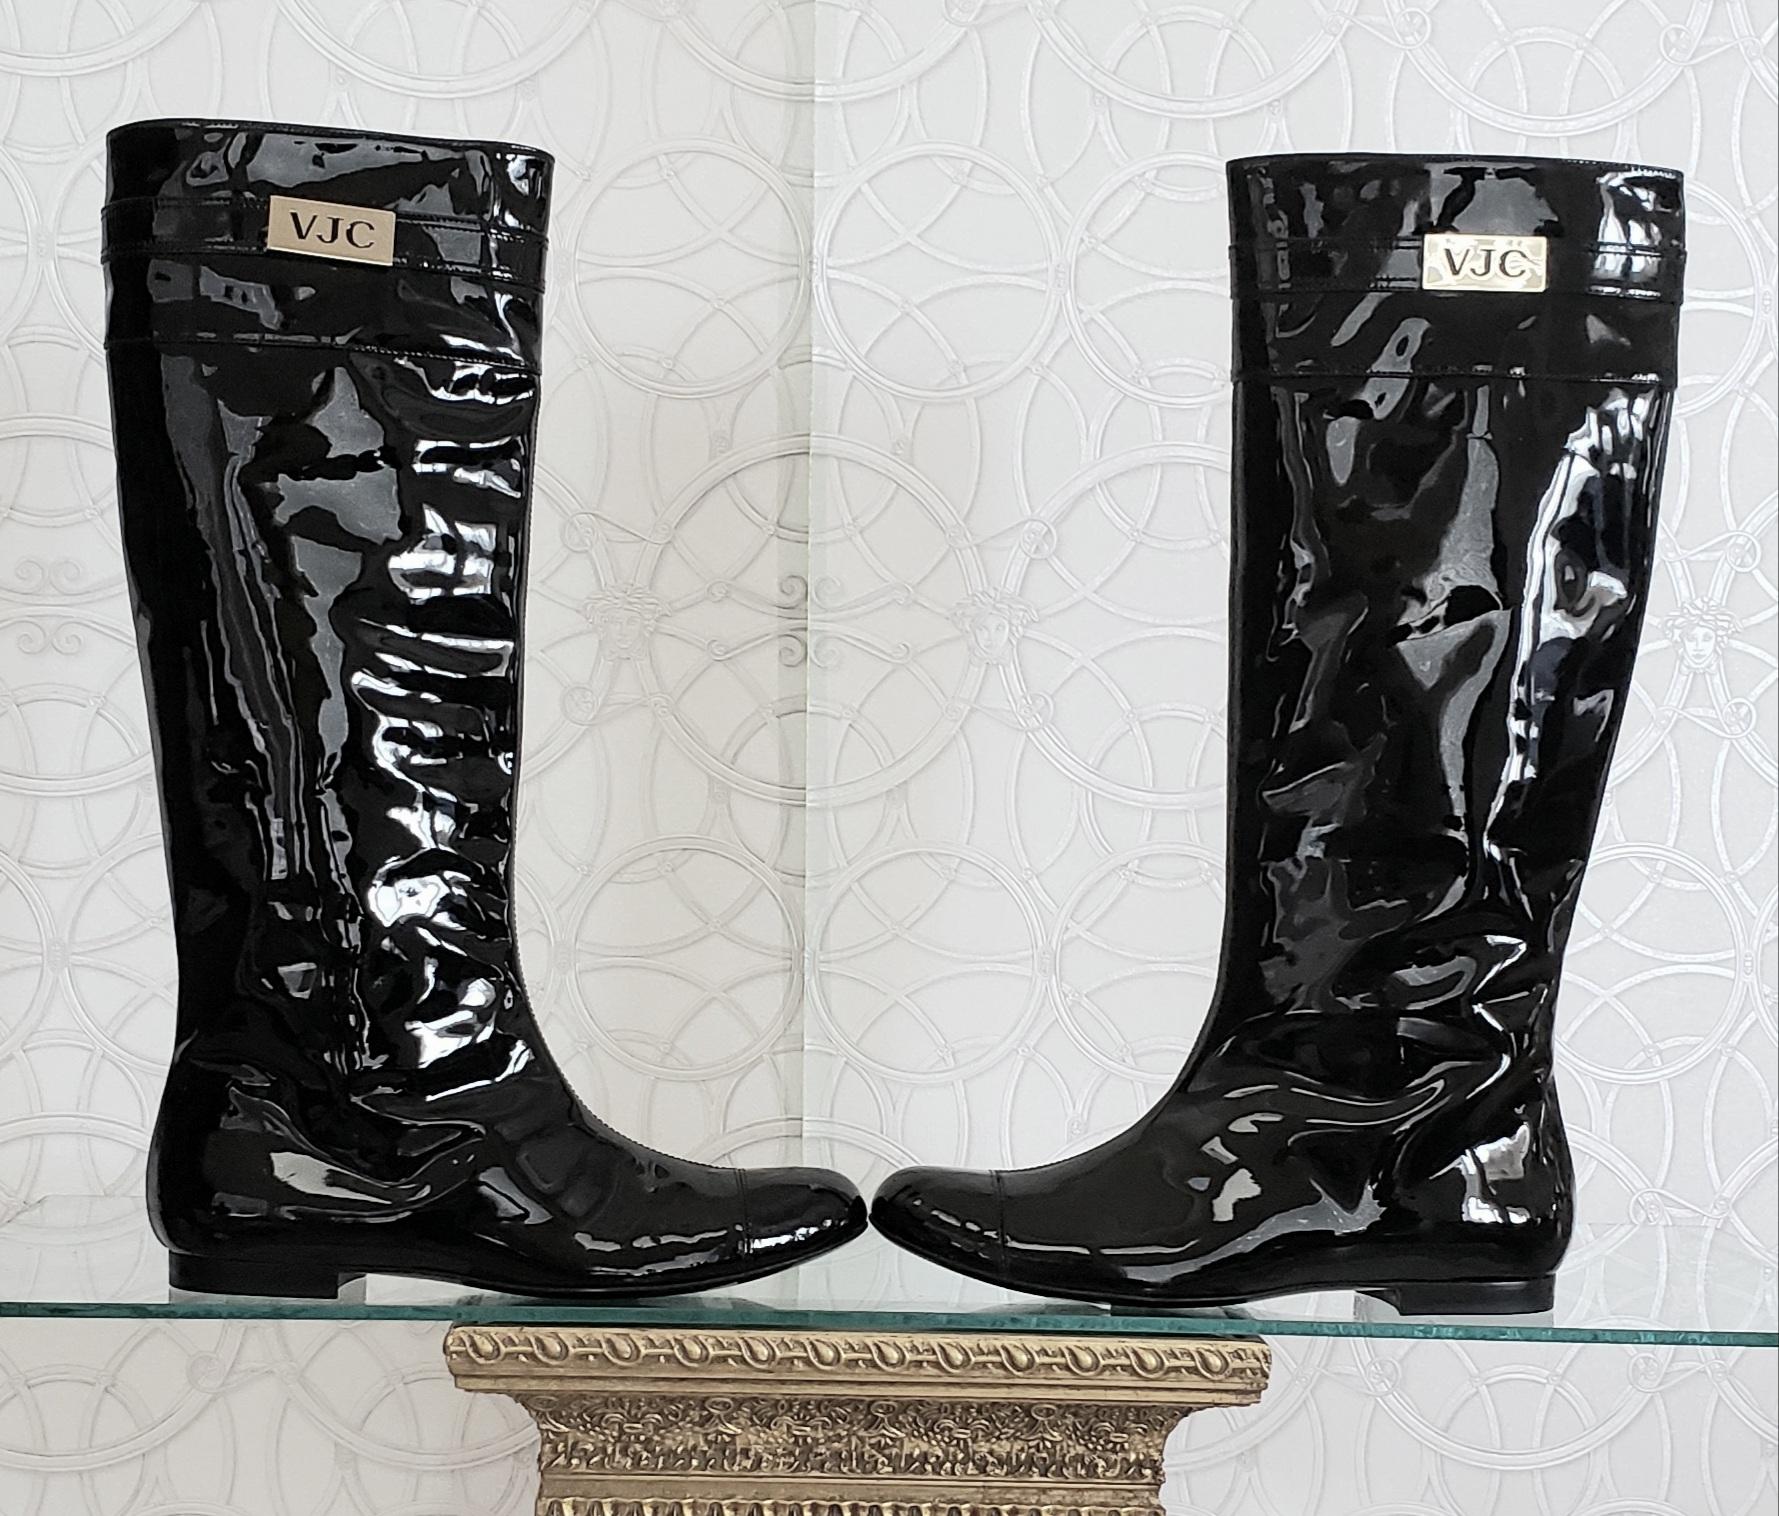 VERSACE VJC BOOTS



Black Patent leather boots




Content: 100% patent leather

lining: Smooth 100% gold leather 


Height of the boot: 17